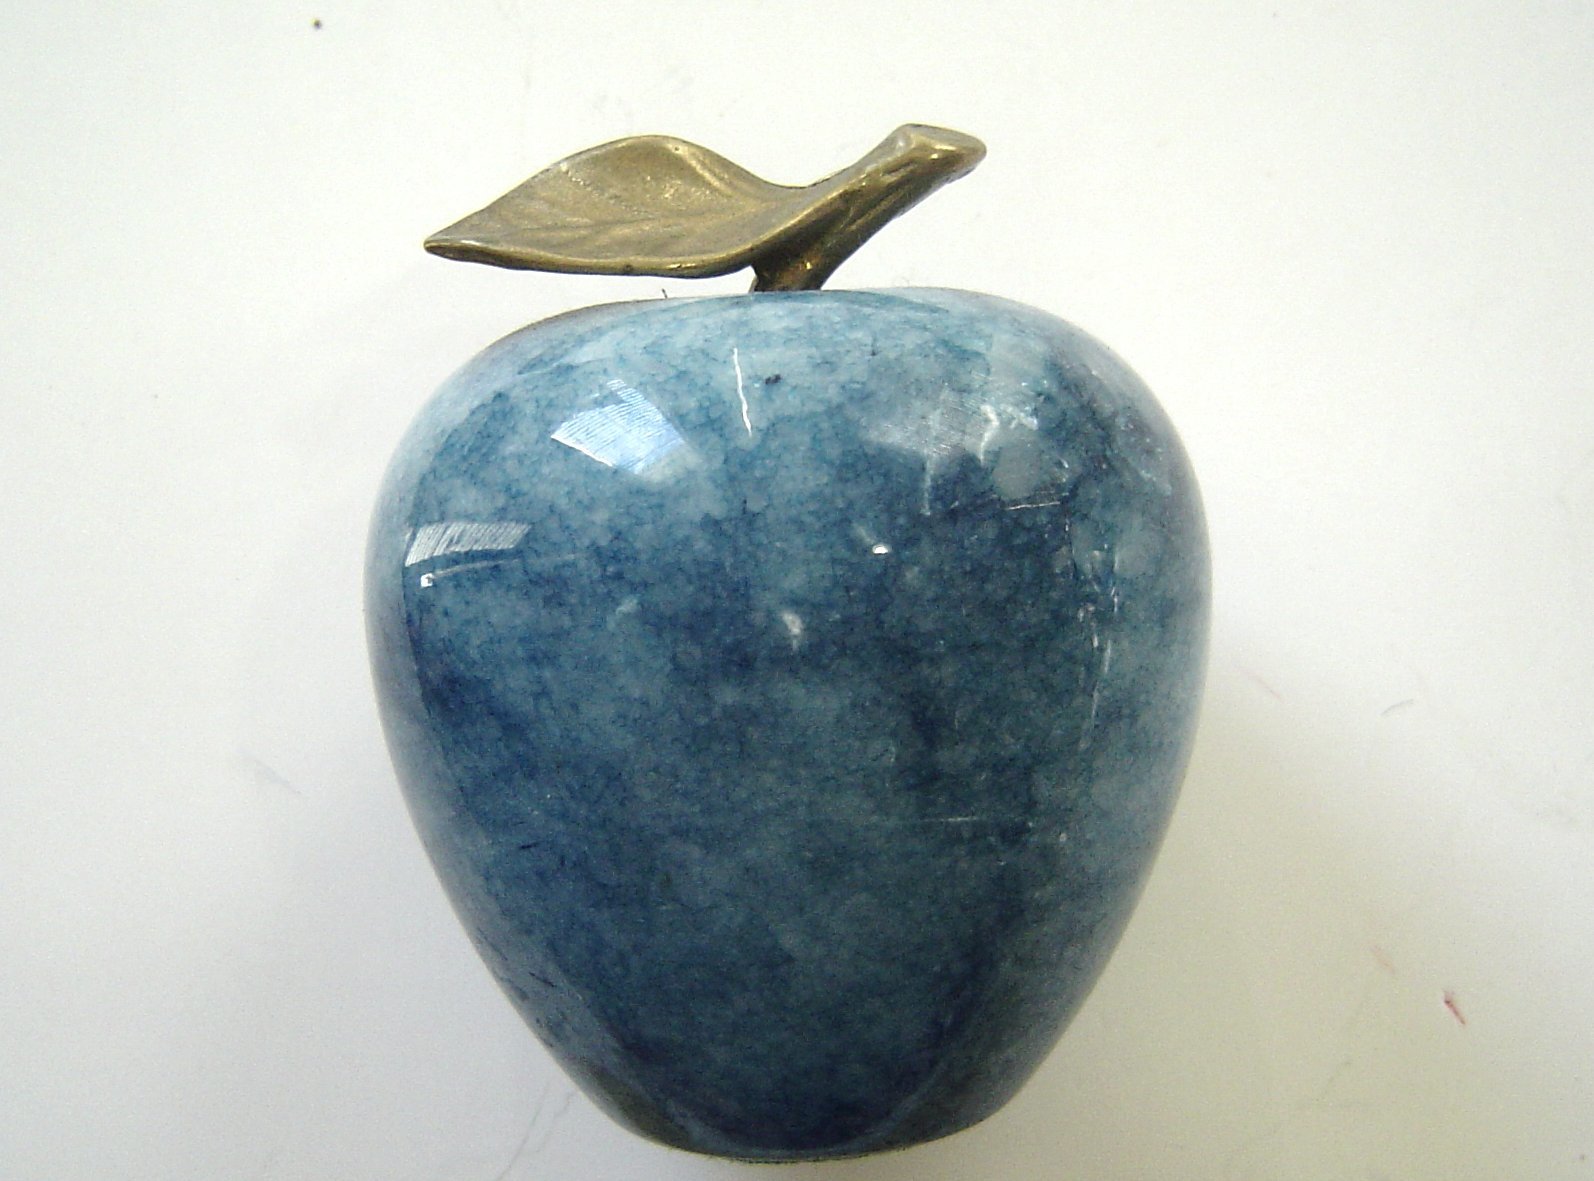  Vintage Marble Apple Paperweight Blue Apatite Apple with Brass Stem & Leaf  - $19.99